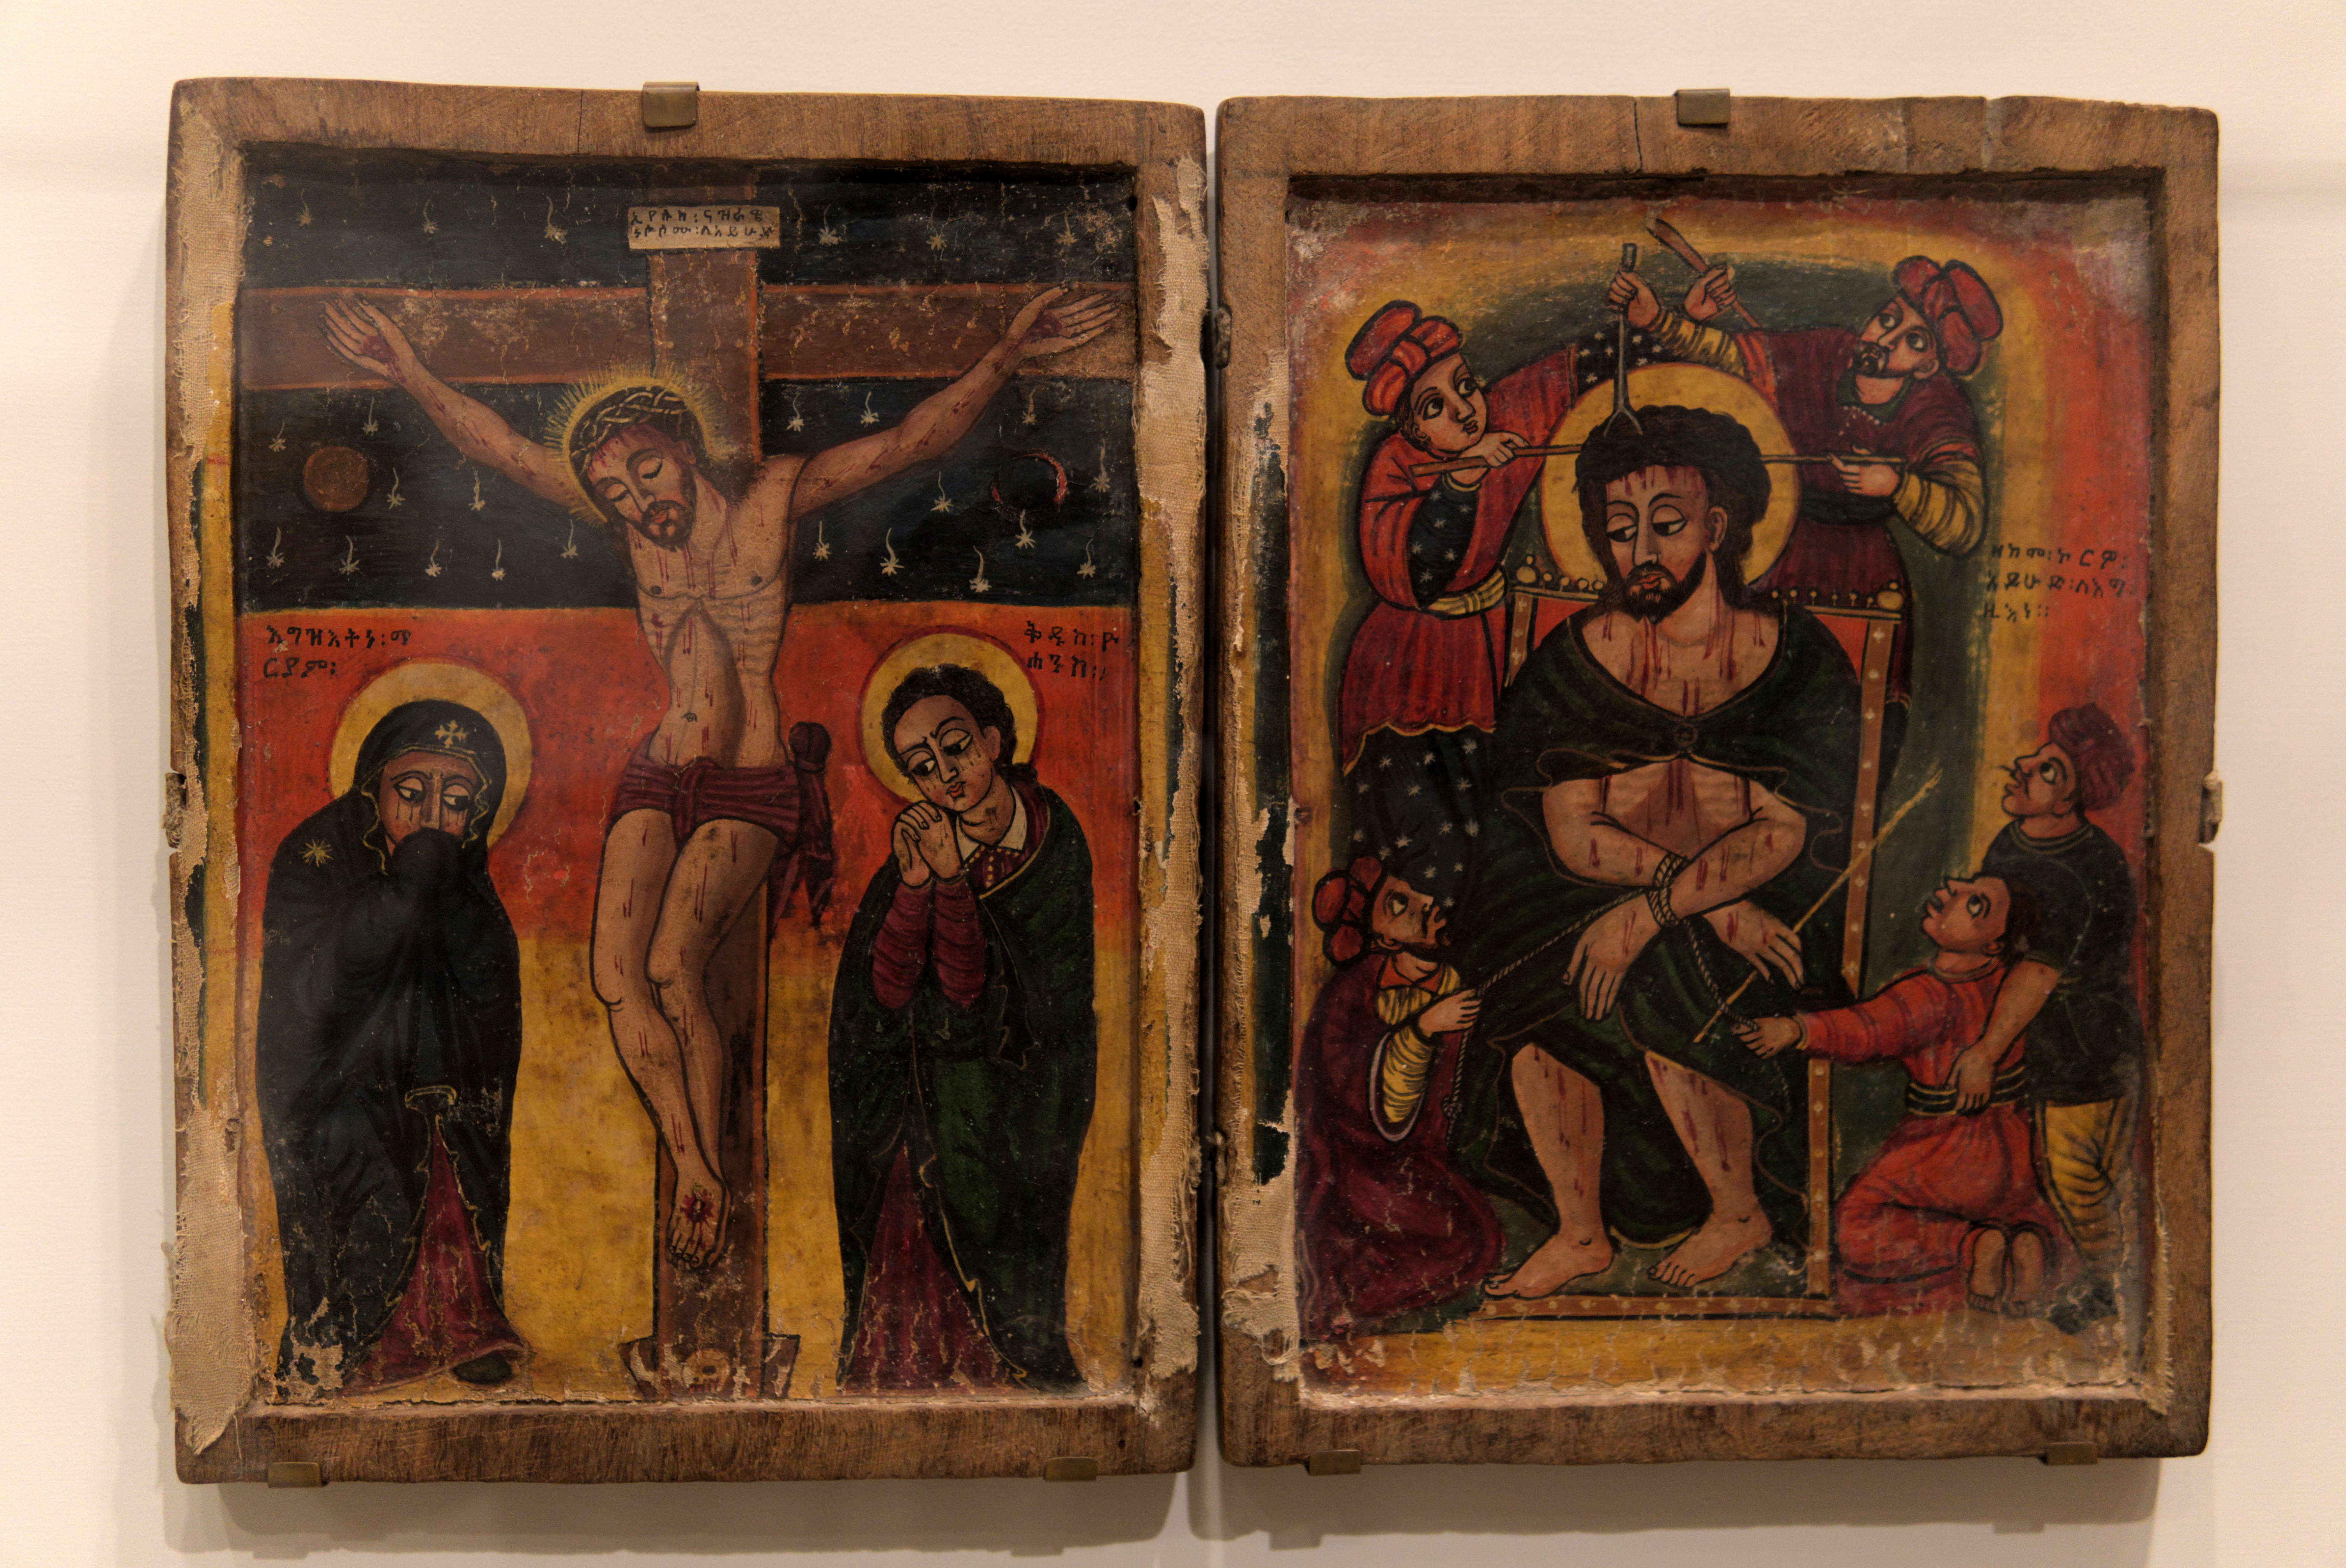 Crucifixion-Mocking diptych